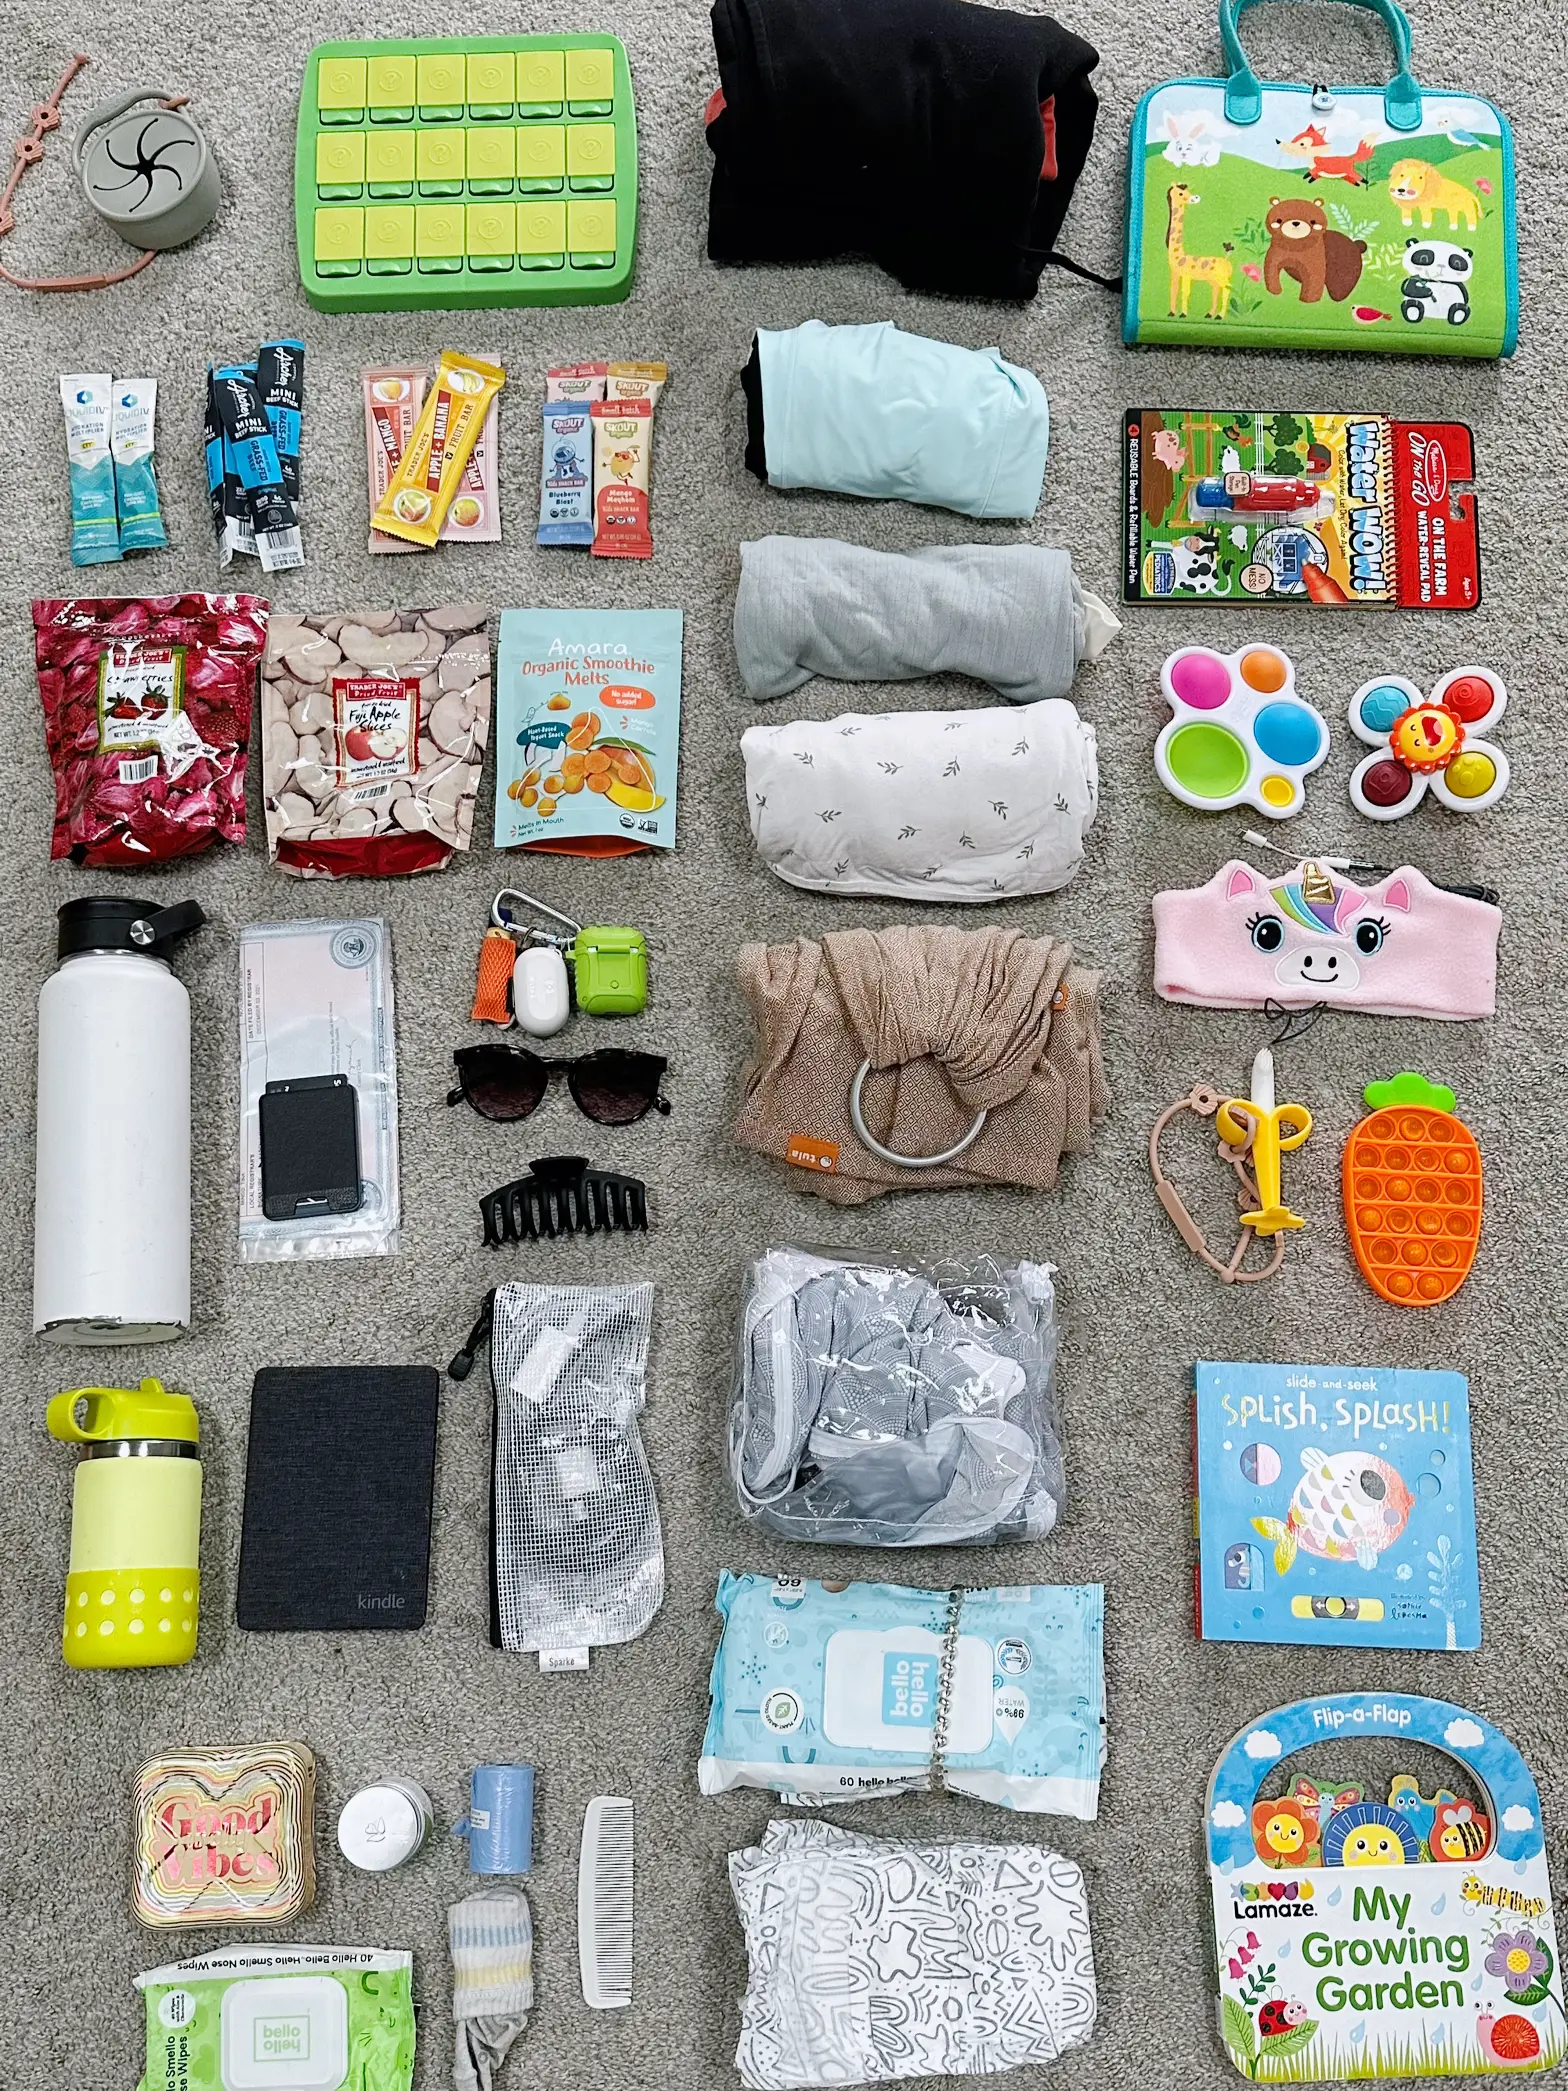 packing travel with kid - Lemon8 Search